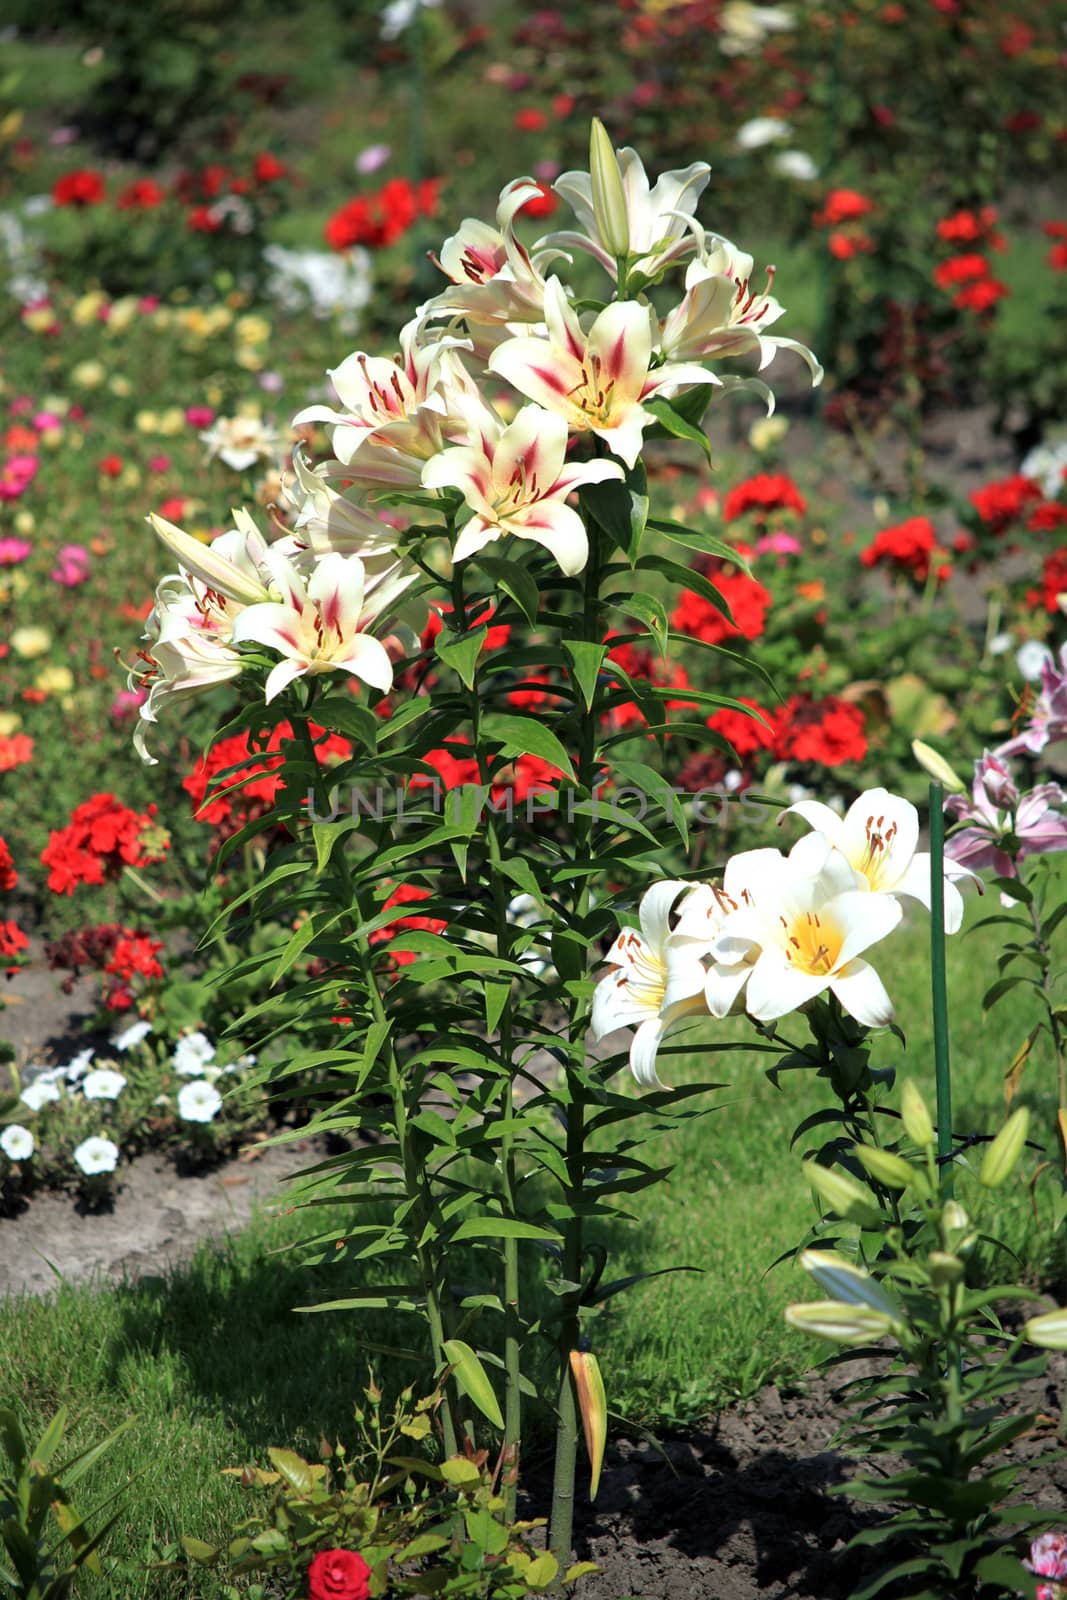 White lilies with green leaves and thin stems growing in the garden on the background of other equally beautiful flowers.